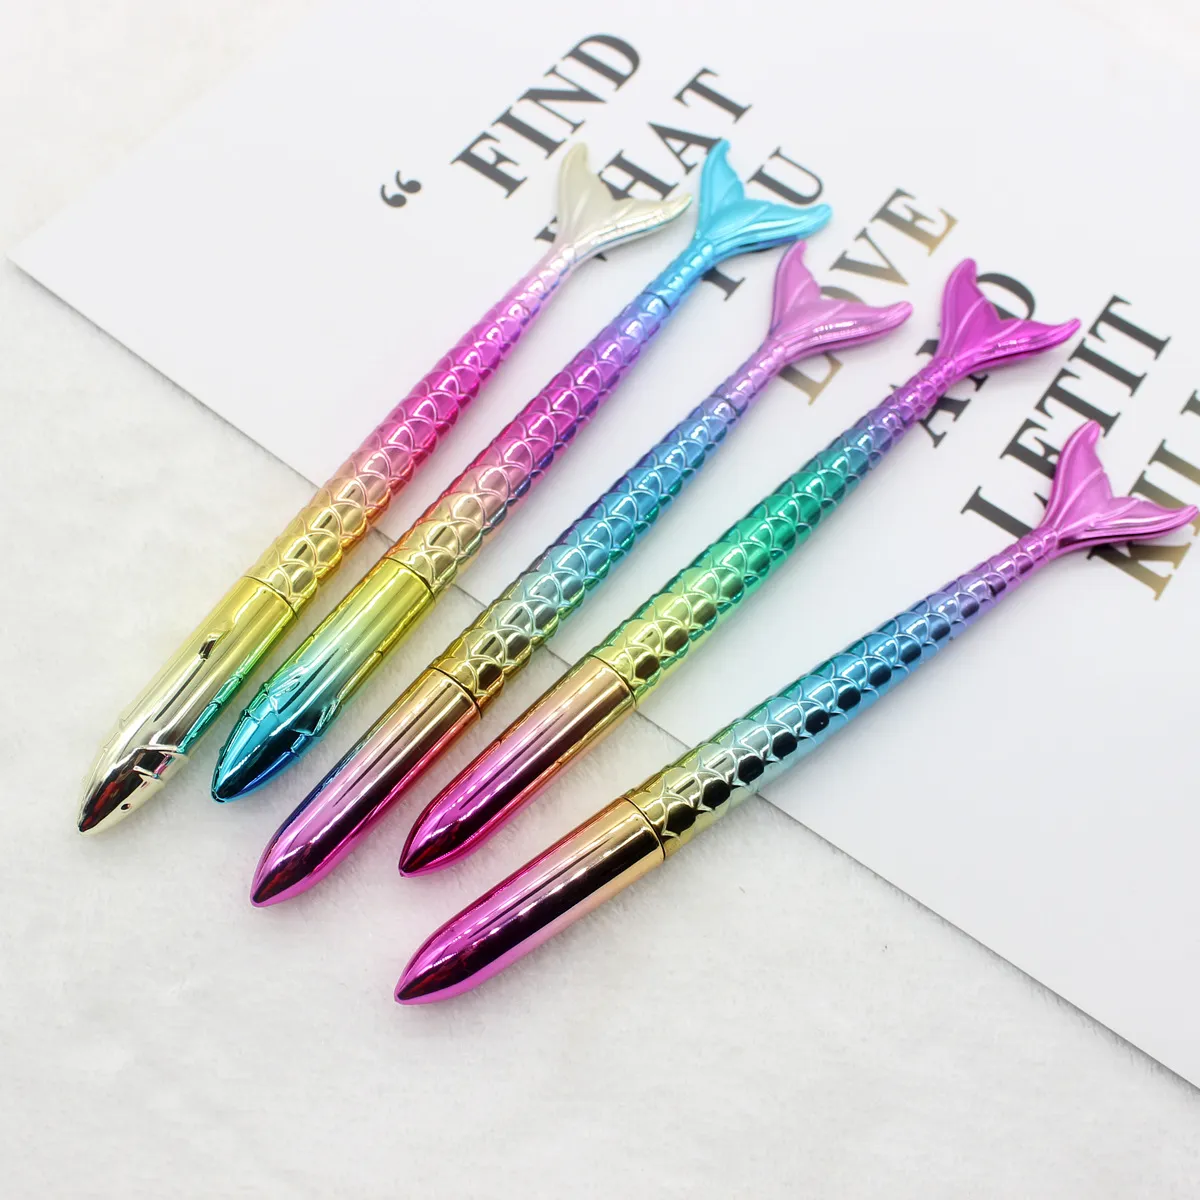 Wholesale Korean Mermaid Pen Gradient Rainbow Changing Color, Cute And  Novelty Stationery For Girls, Fancy Tesseract Shape Party Supplies From  Giftstore888, $0.51